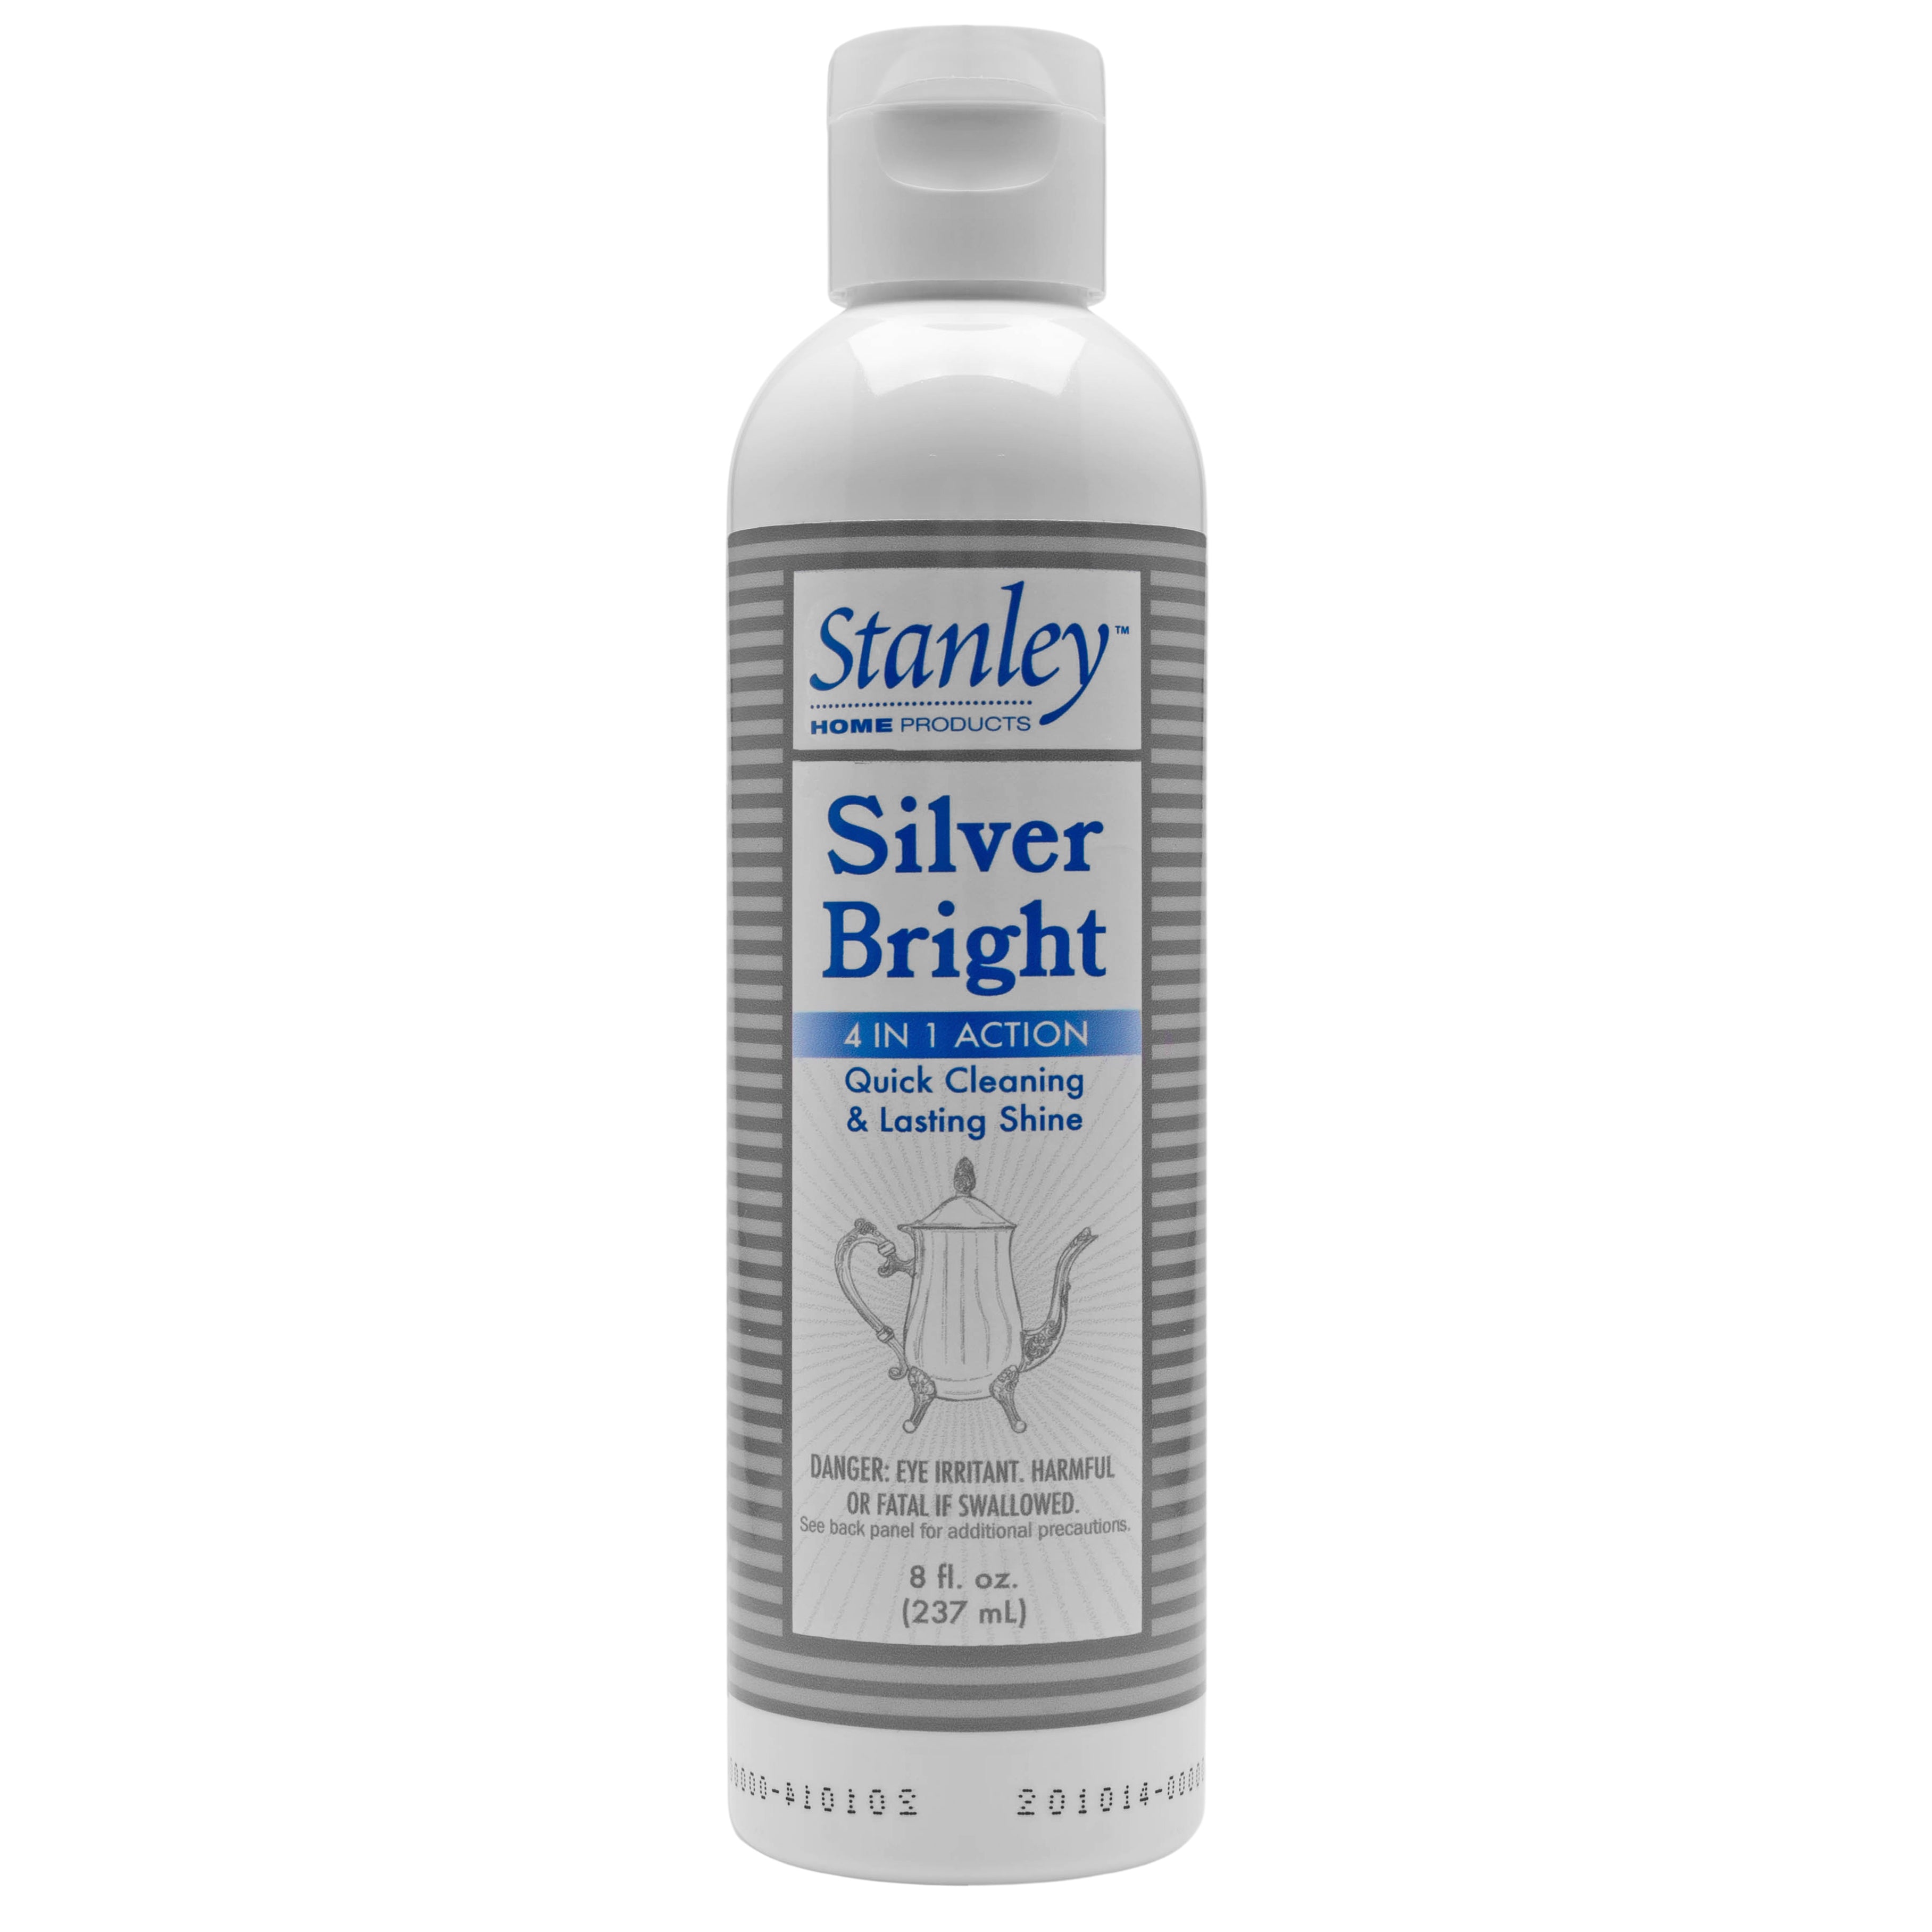 Stanley Home Silver Bright – Silver Cleaner & Polish – for Silver Plate, Sterling, Chrome, Fine Antique Silver – Safely Cleans, Removes Tarnish & Help